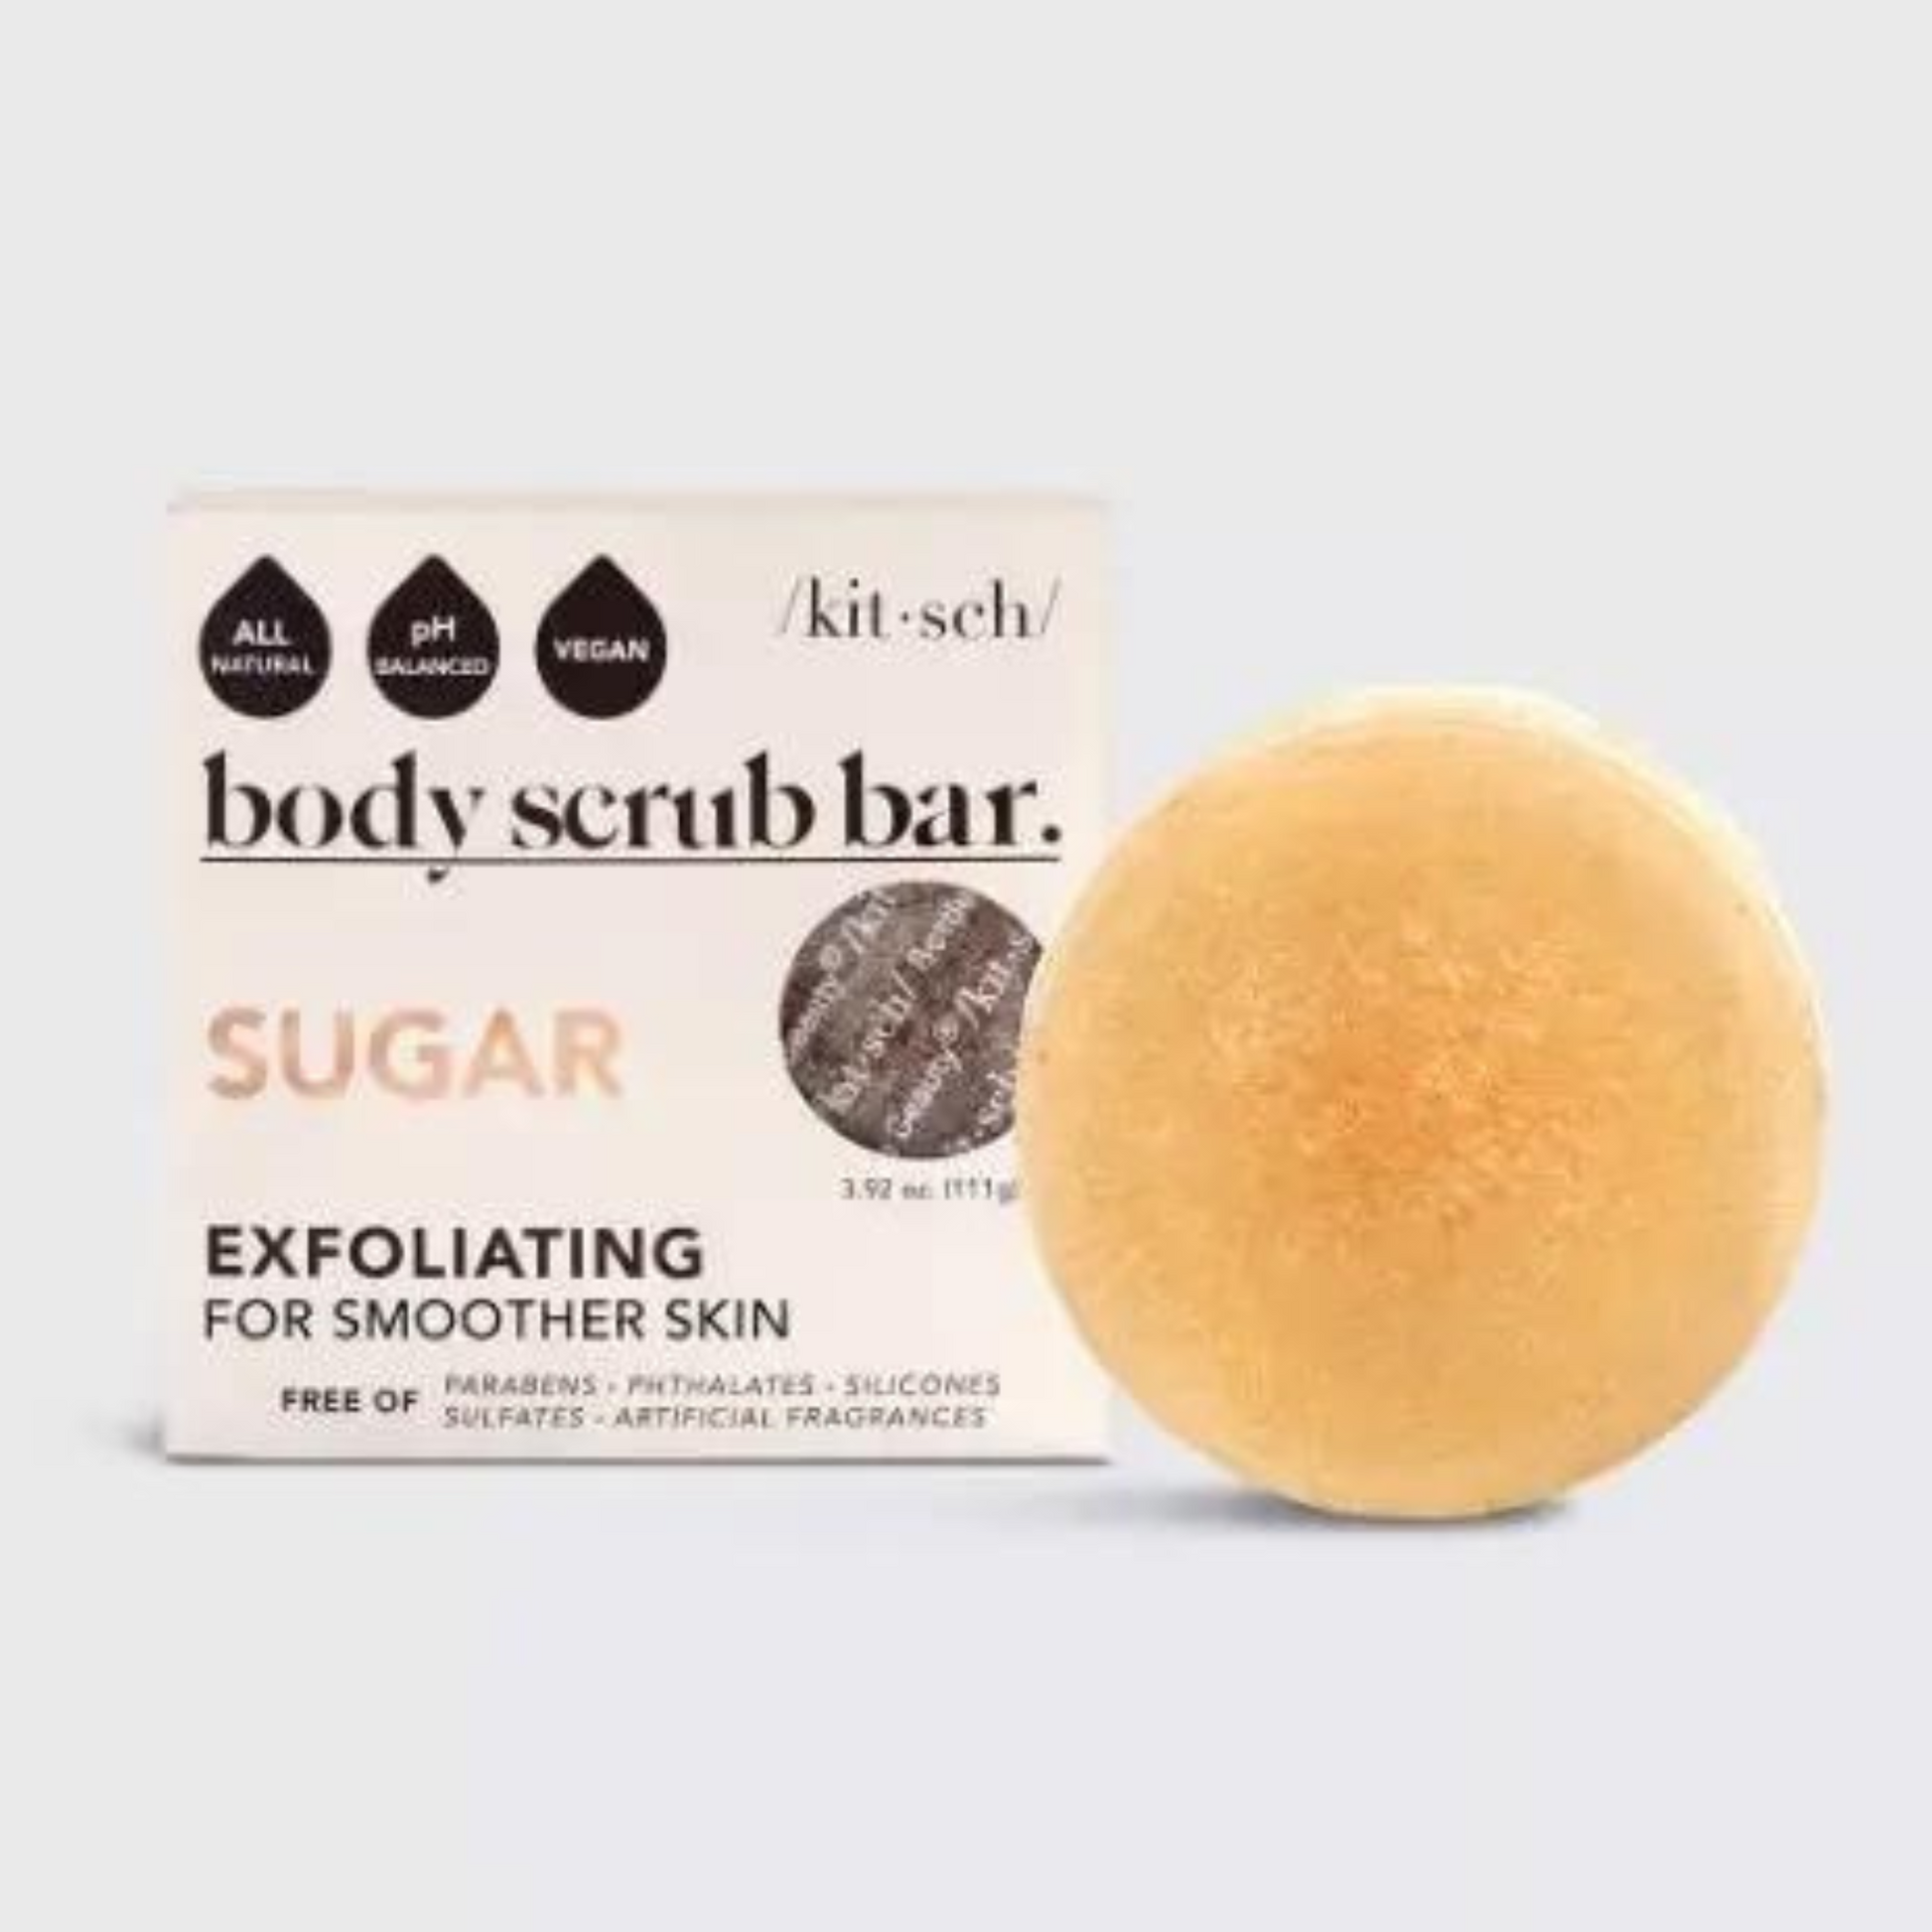 This Sugar Exfoliating Body Scrub Bar is free of sulfates, parabens and phthalates for a clean and safe skin treatment. Sugar granules gently buff away dead skin cells while walnut shell fine-tunes the texture. Coconut oil deeply moisturizes and penetrates the skin, leaving it feeling silky and hydrated. Enjoy the sweet aroma of warm sugar for a luxurious shower experience. Reduce plastic consumption and help promote a zero-waste lifestyle with Bottle-Free Beauty Bars.